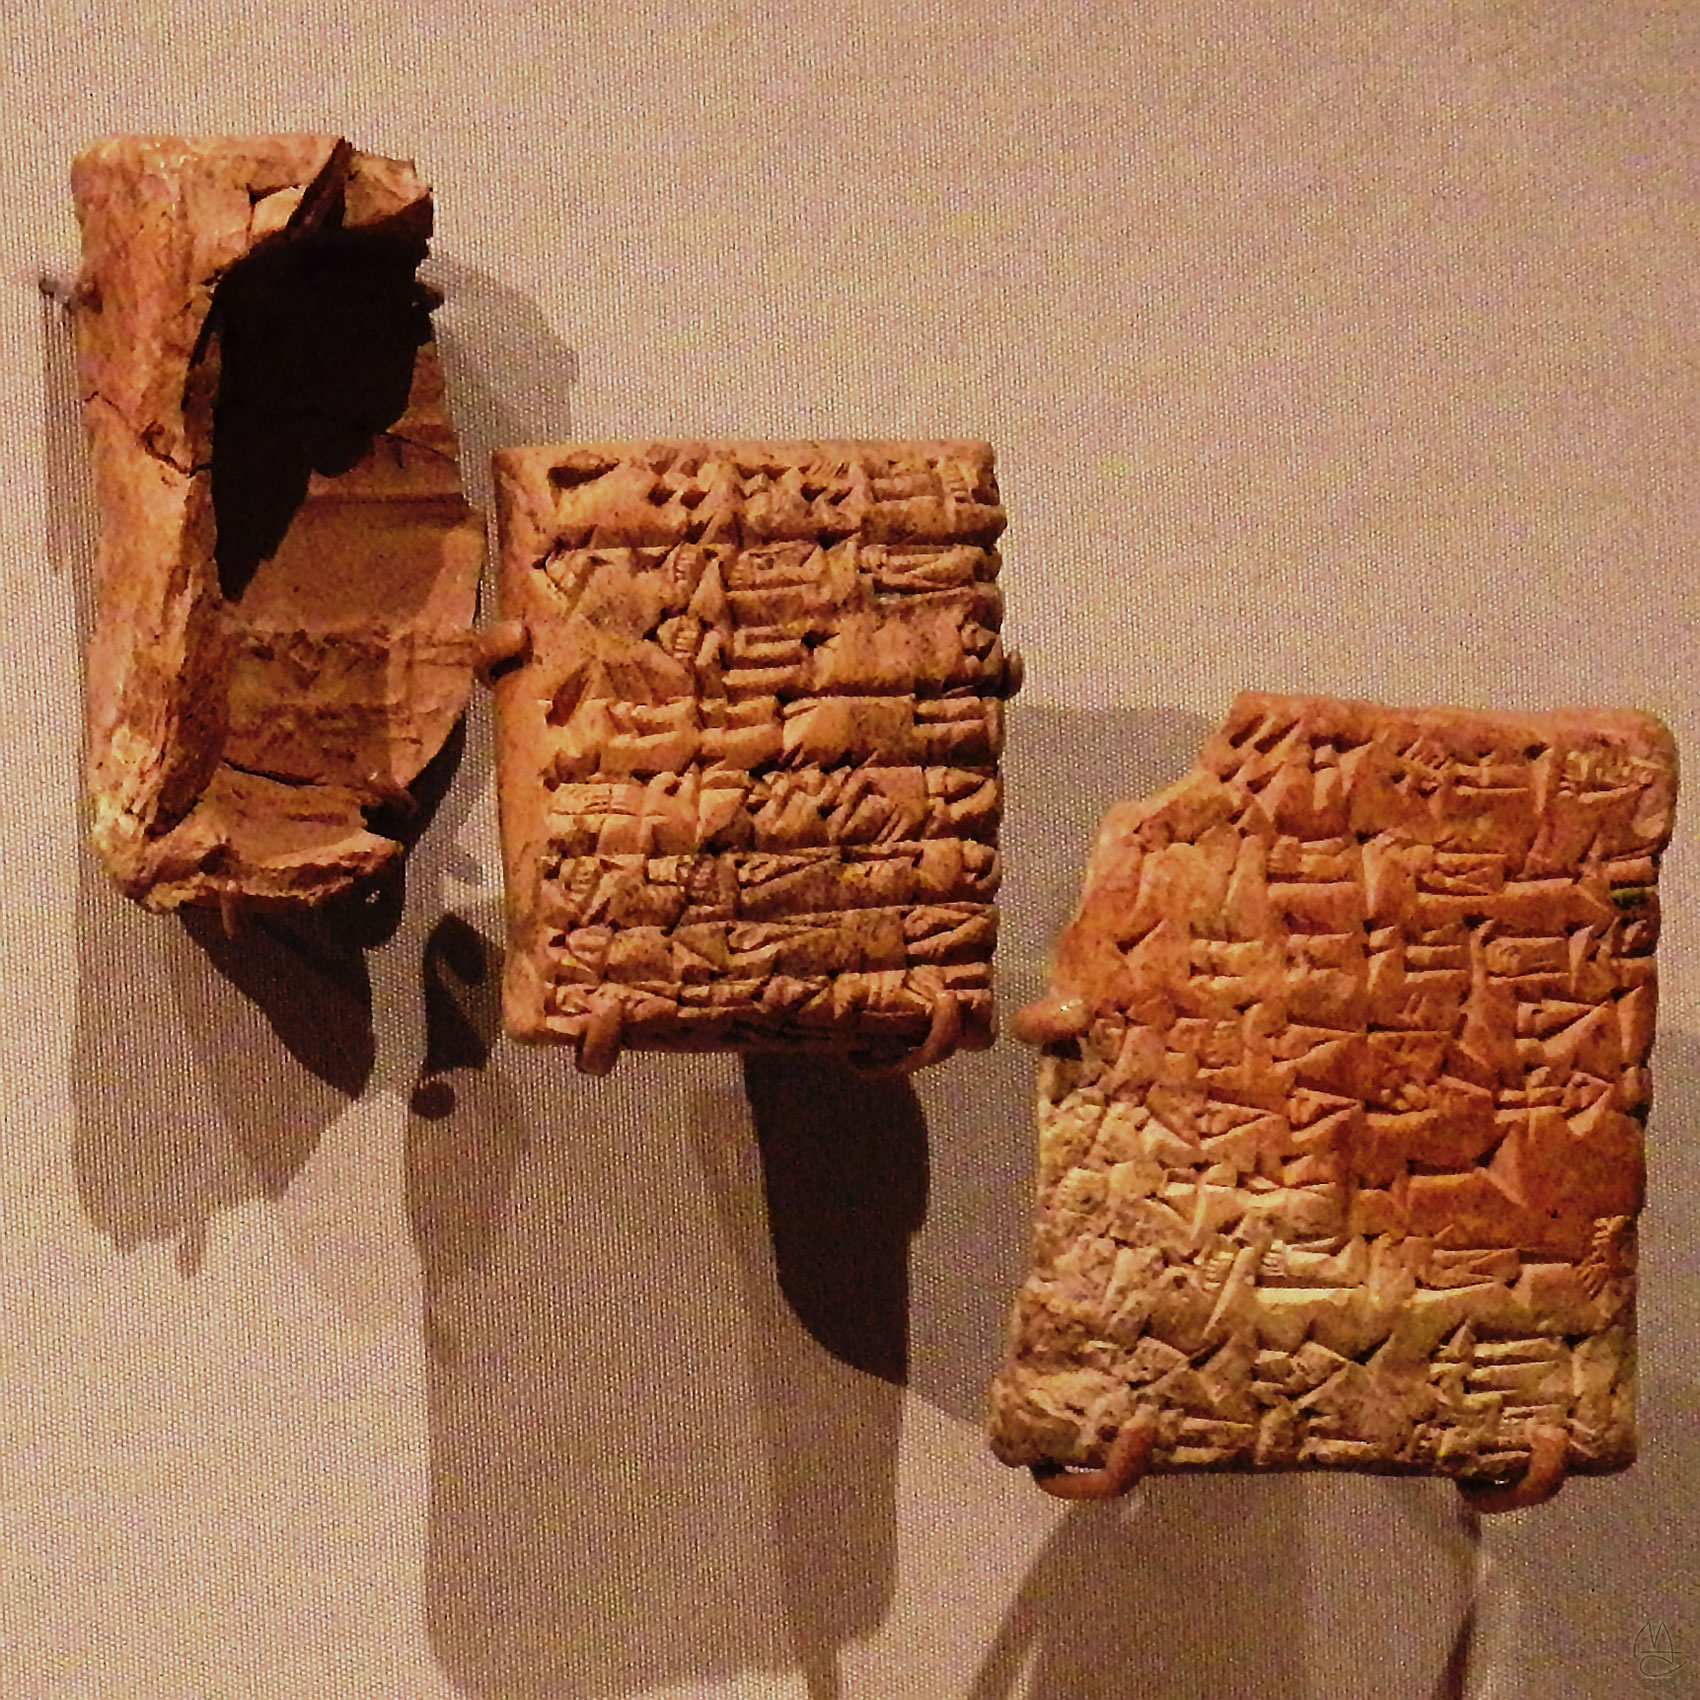 Cuneiform Tablet with Receipt for Grain and Envelope 2050 BCE